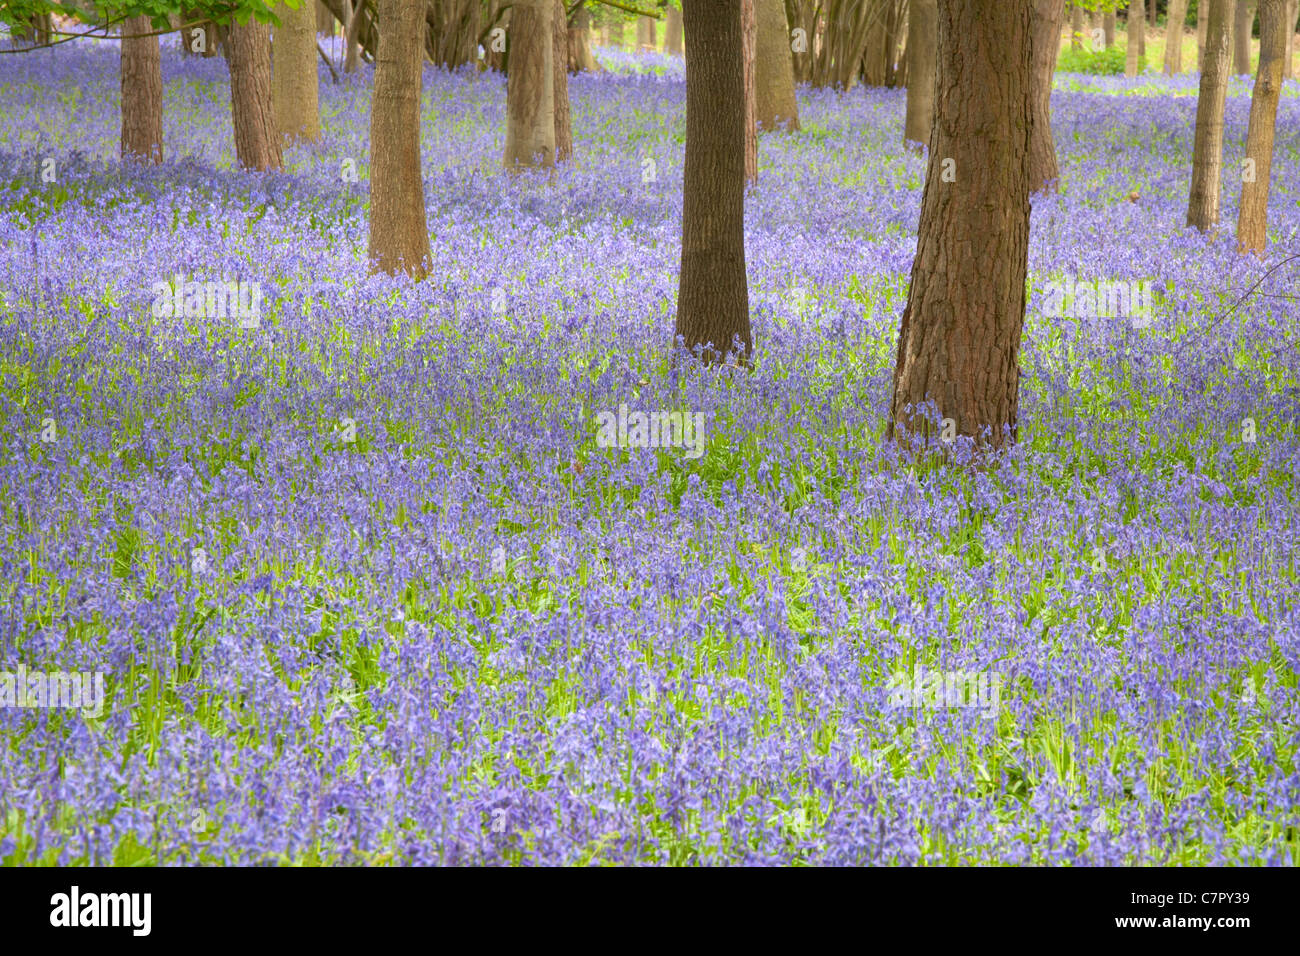 BLUEBELL FIELDS IN HAUGHLEY PARK Stock Photo